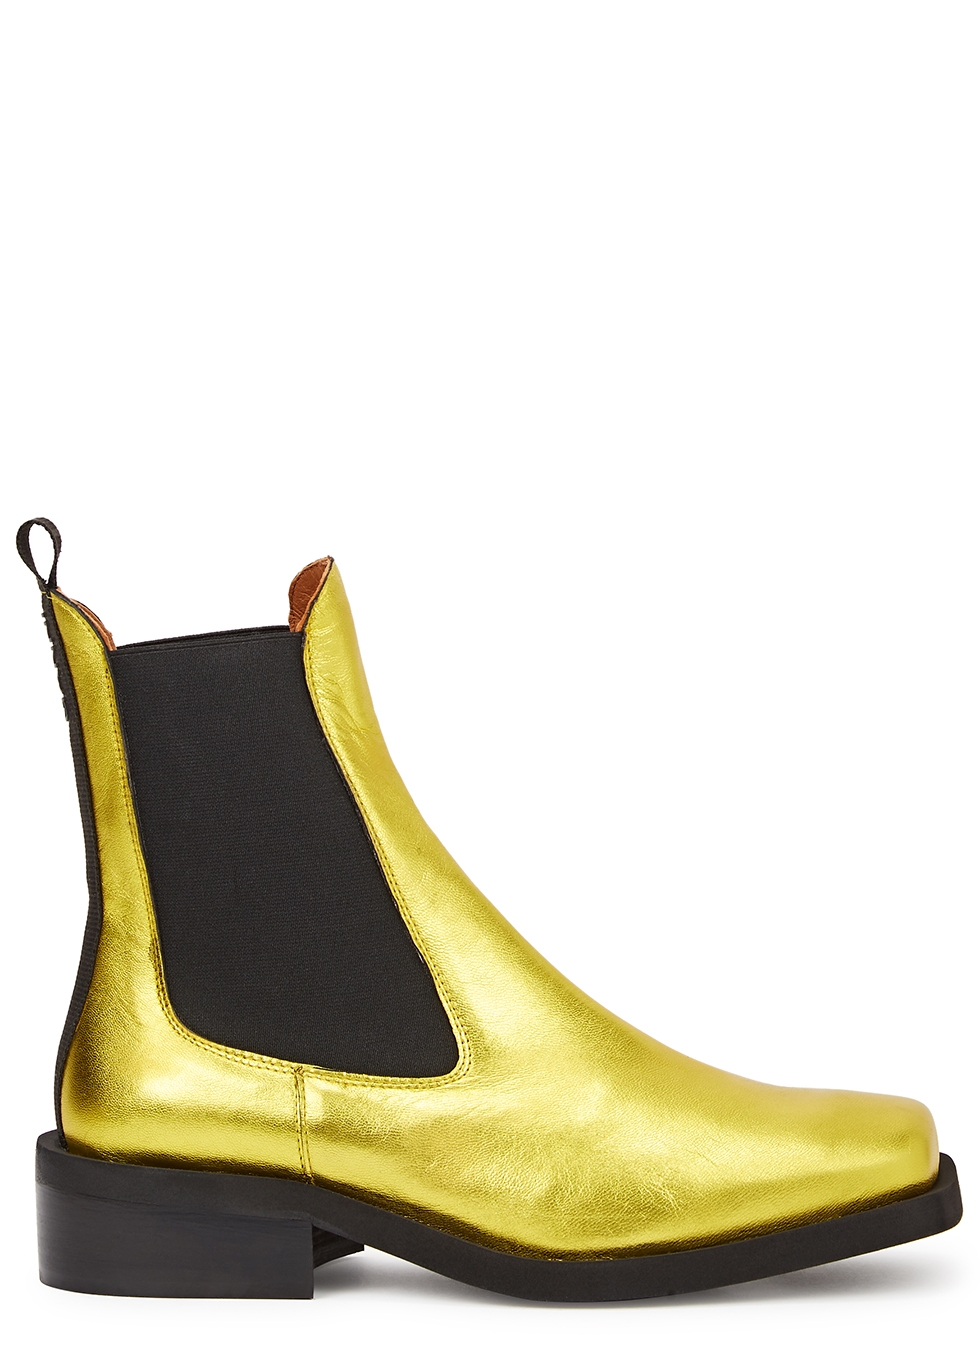 Gold leather Chelsea boots